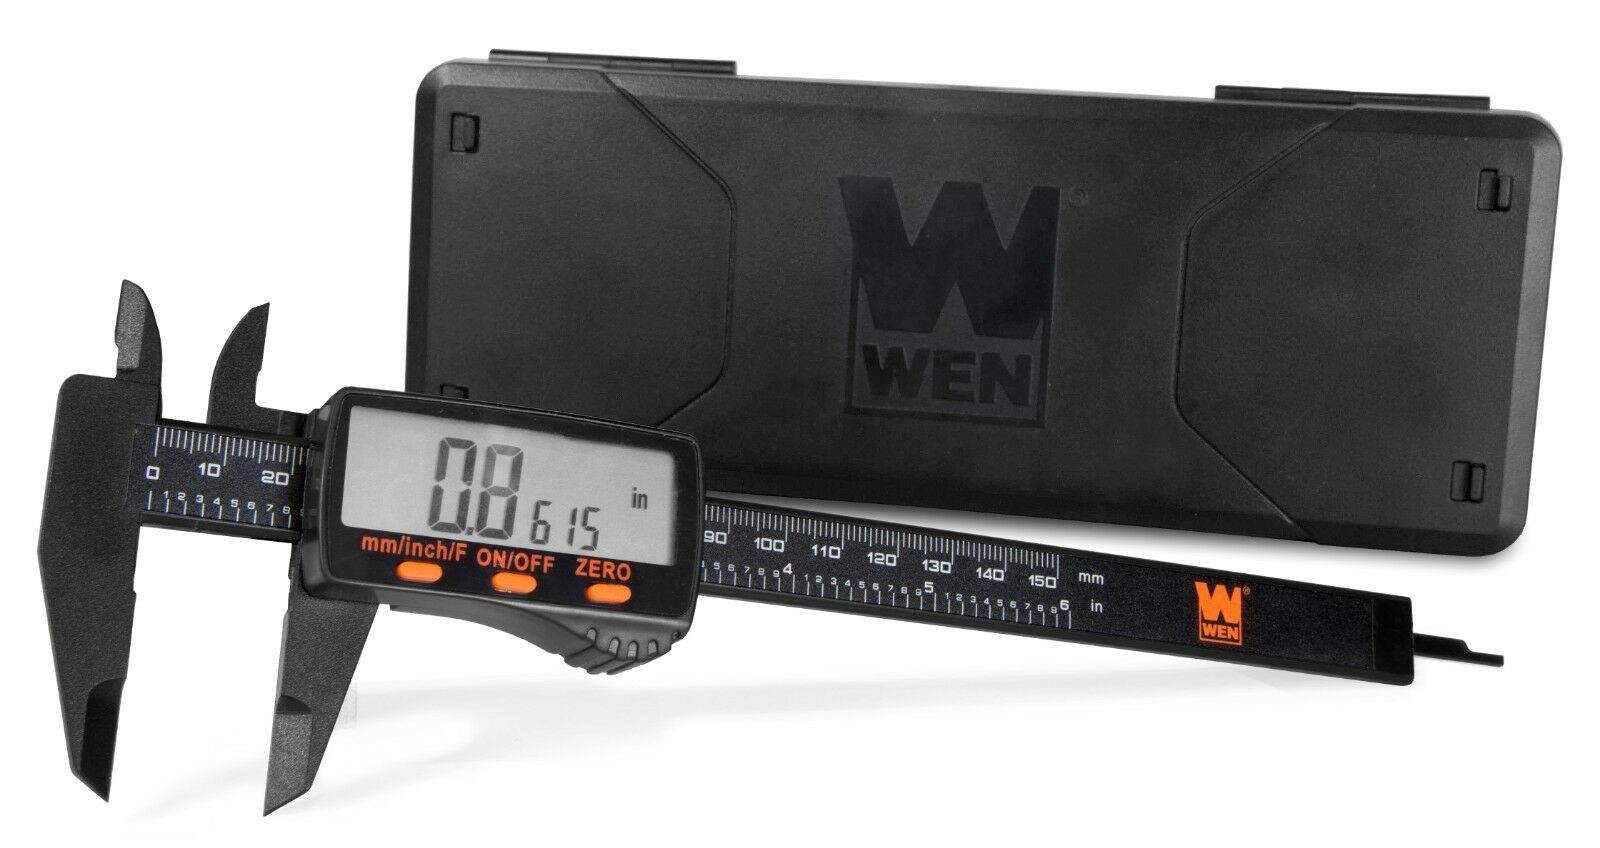 Wen 10761 Electronic 6.1-inch Digital Caliper With Lcd Readout And Storage Case